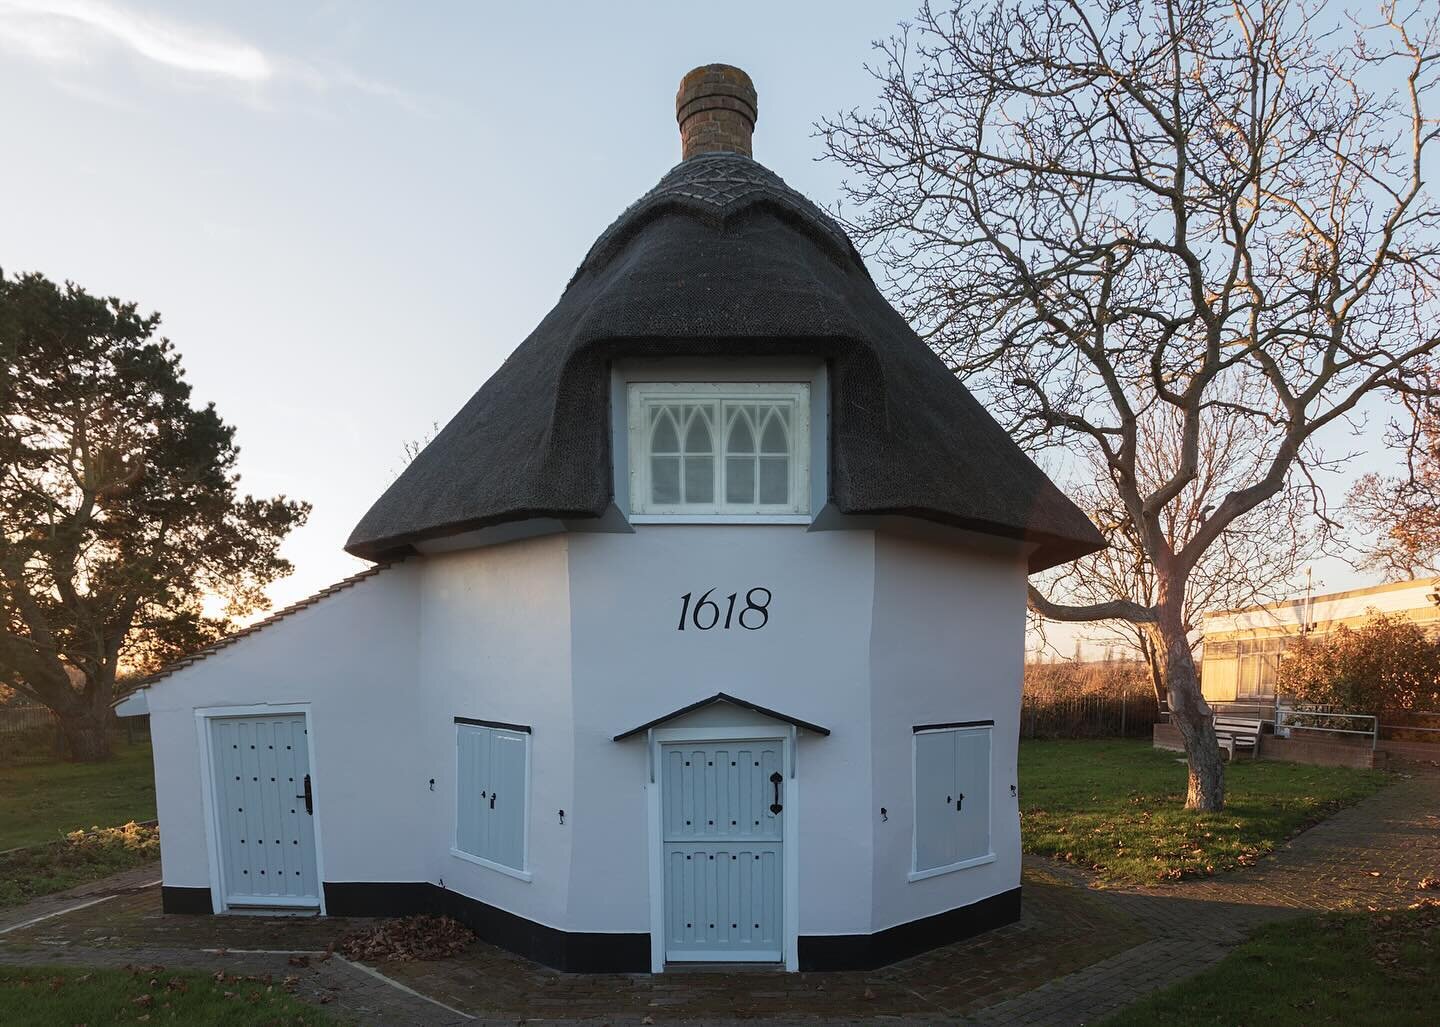 One of two Dutch octagonal cottages which survived in Canvey Island, Essex (2023). This one is now run as the Dutch Cottage Museum, the other one is still in private ownership.

It is believed that Julis Sludder - one of the first Dutchmen to own pro